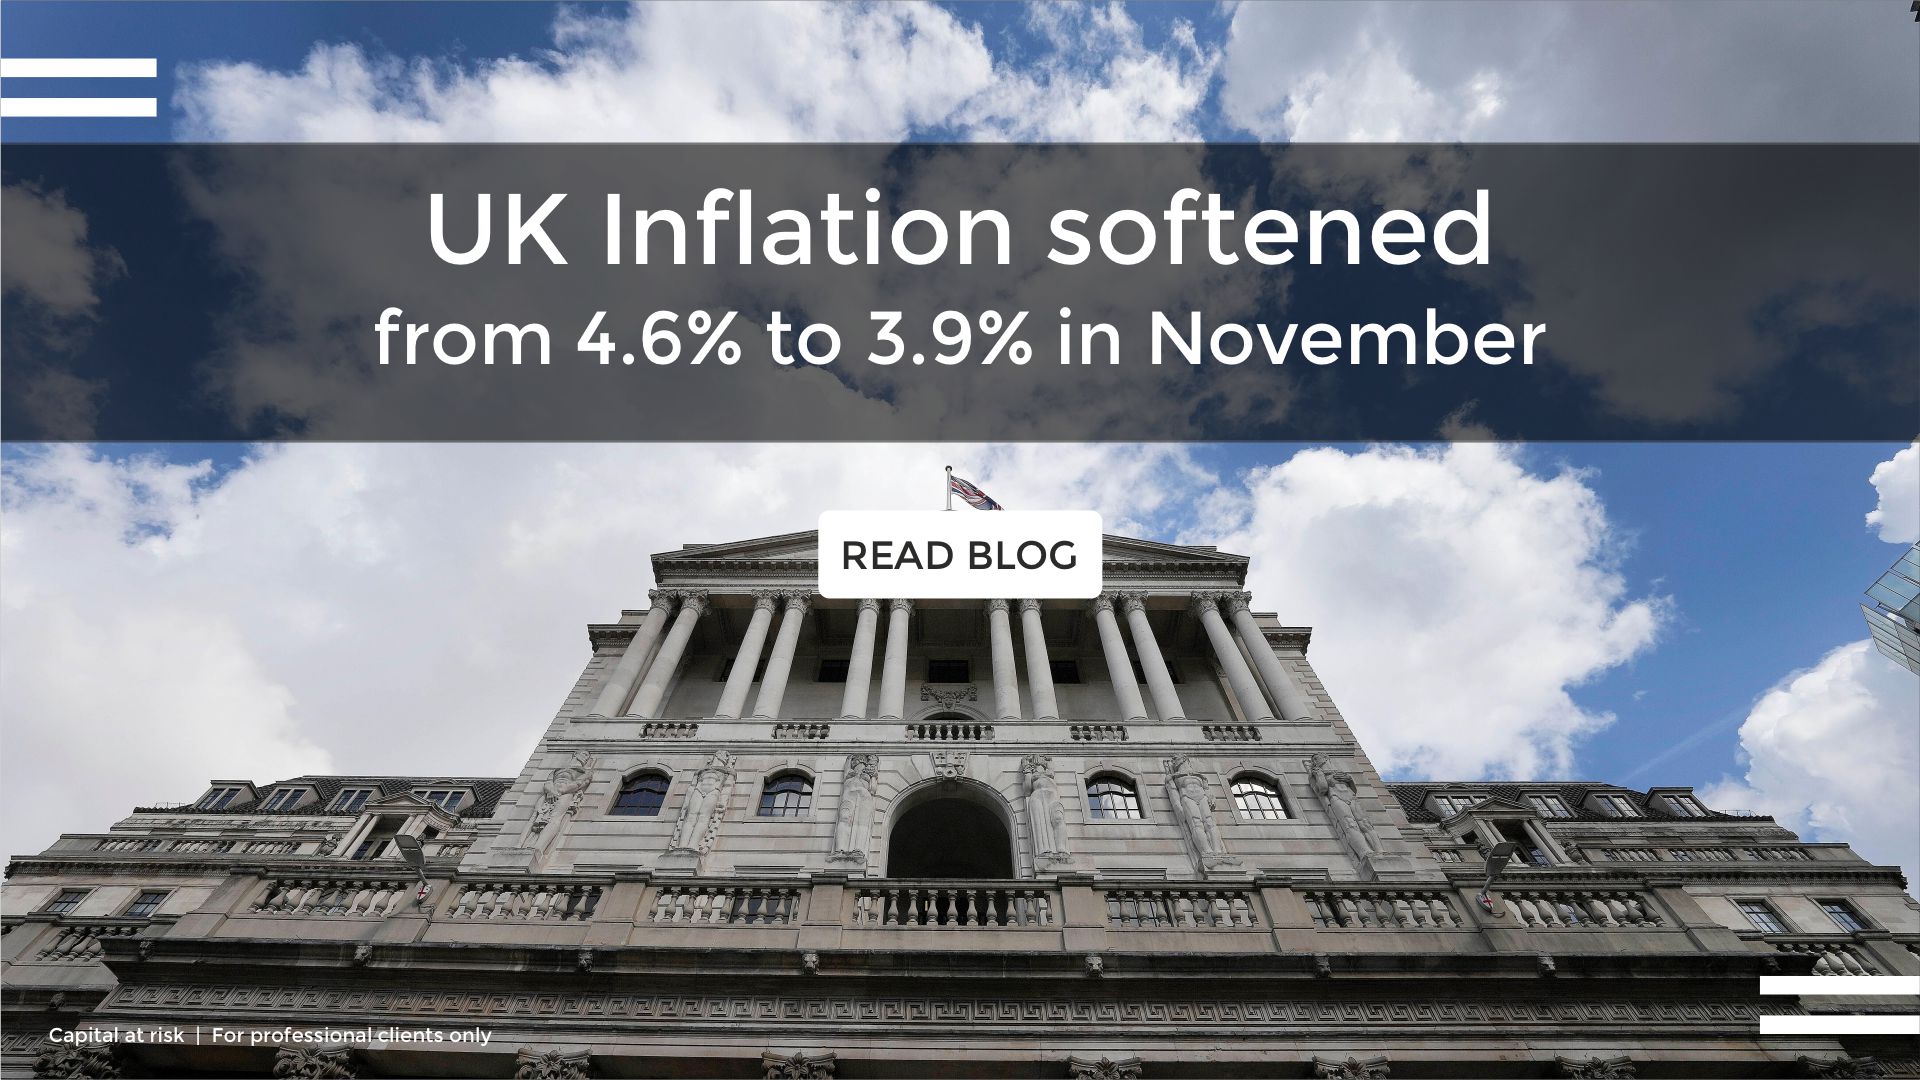 UK Inflation softened from 4.6% to 3.9% in November